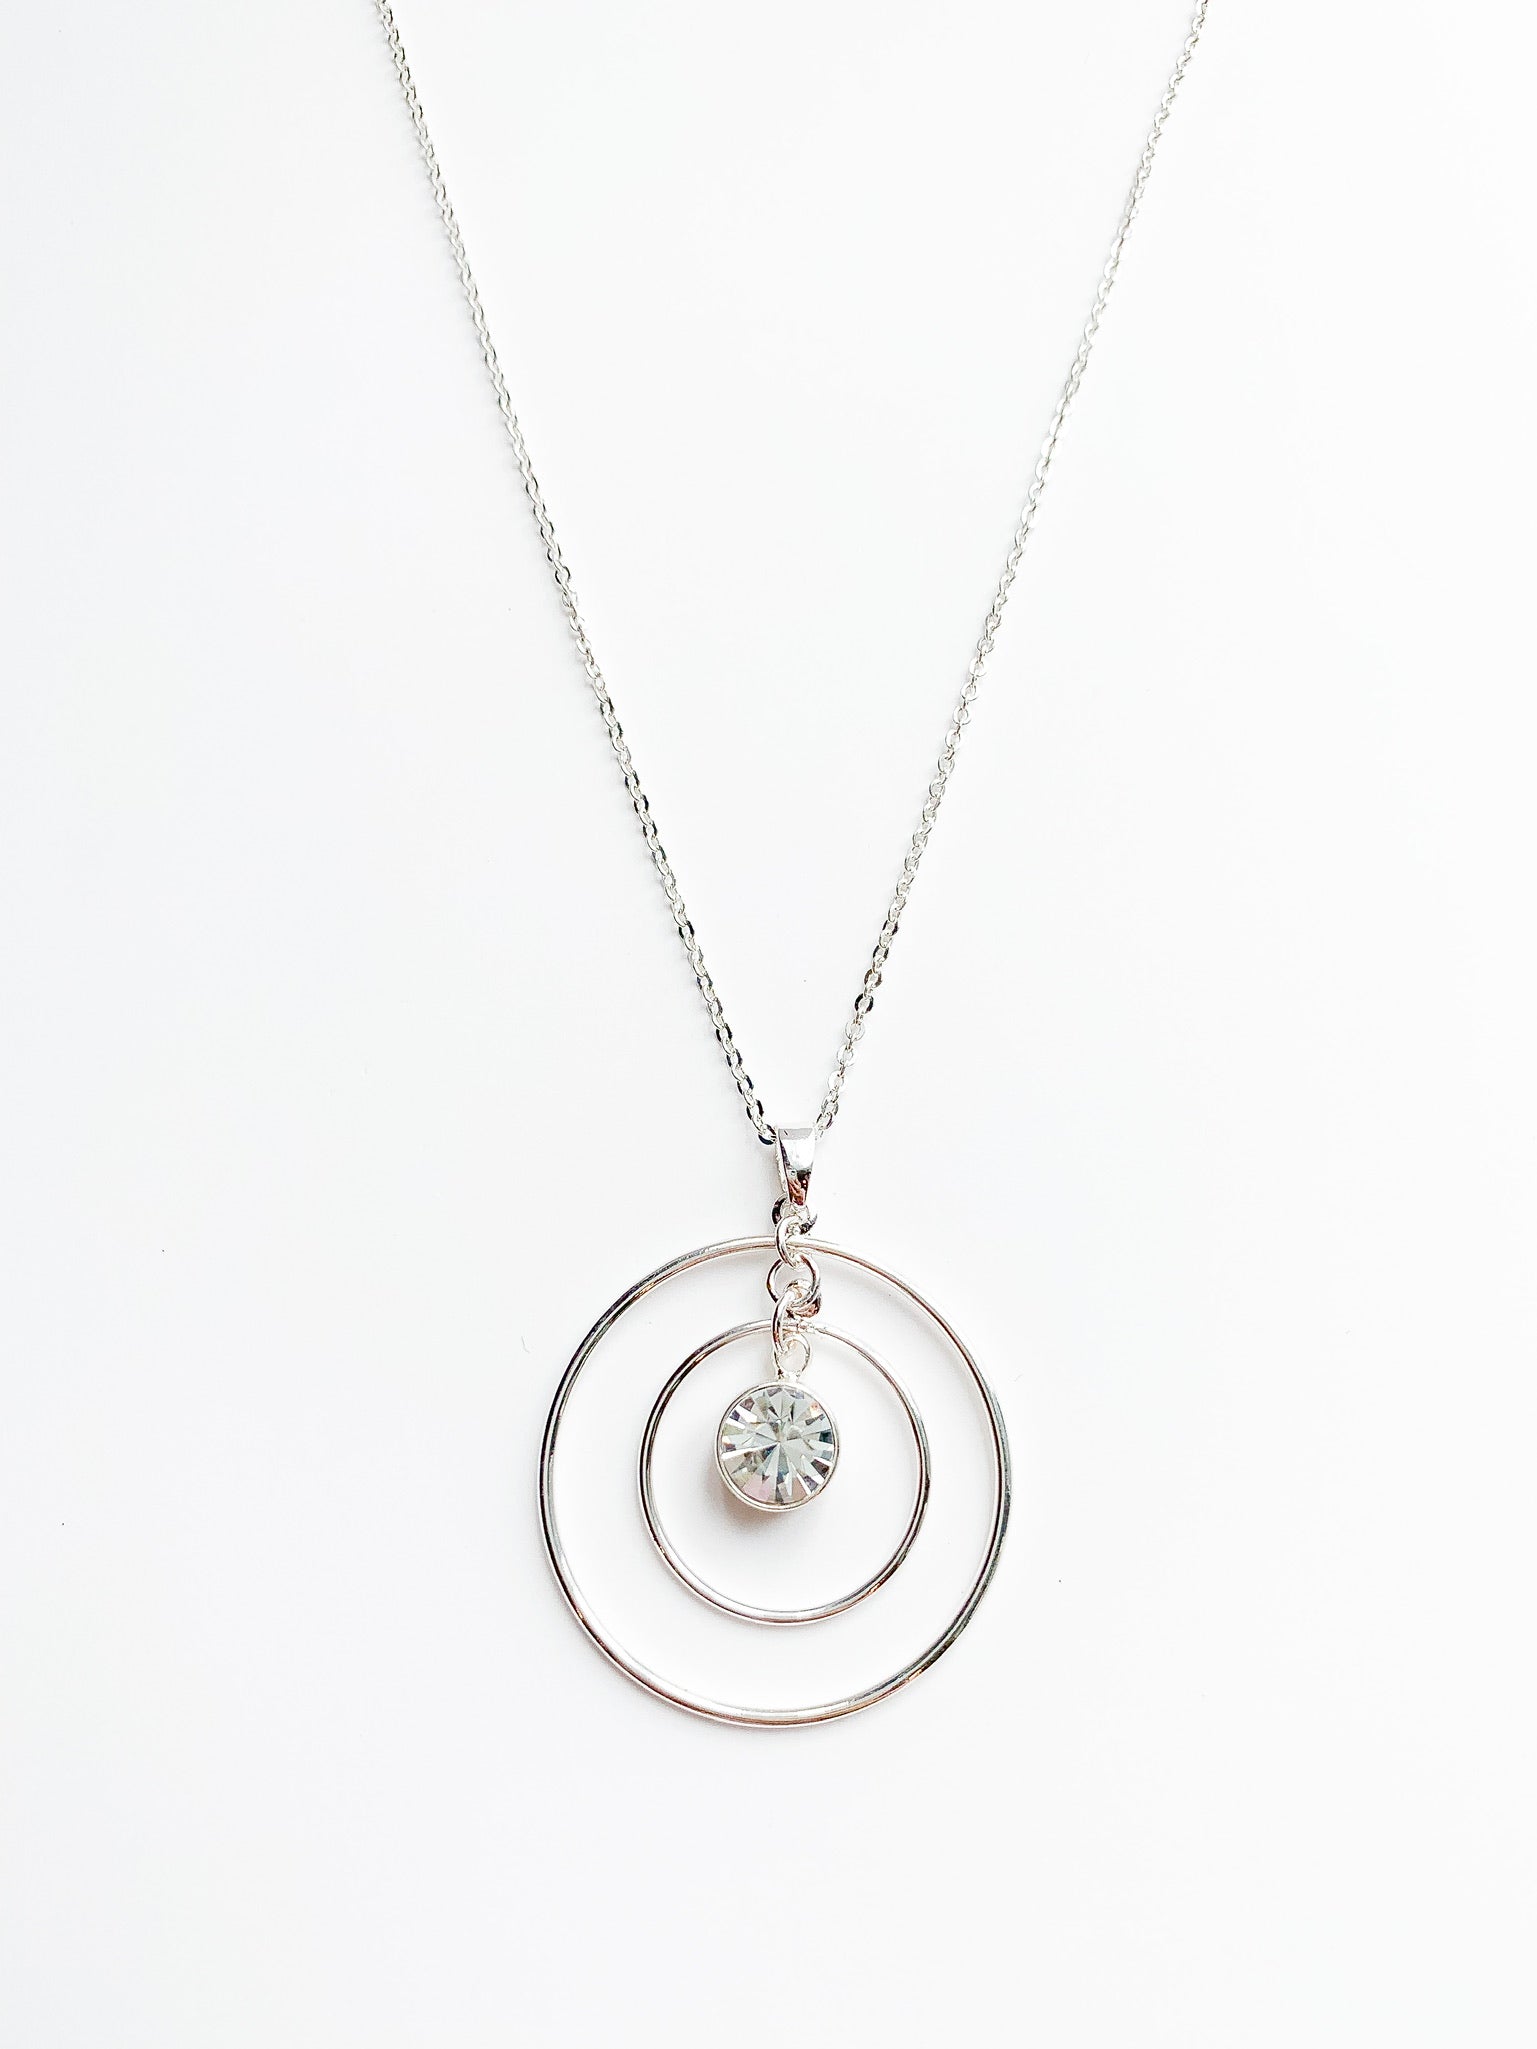 danielle long silver necklace. 2 halos around a crystal pendent.